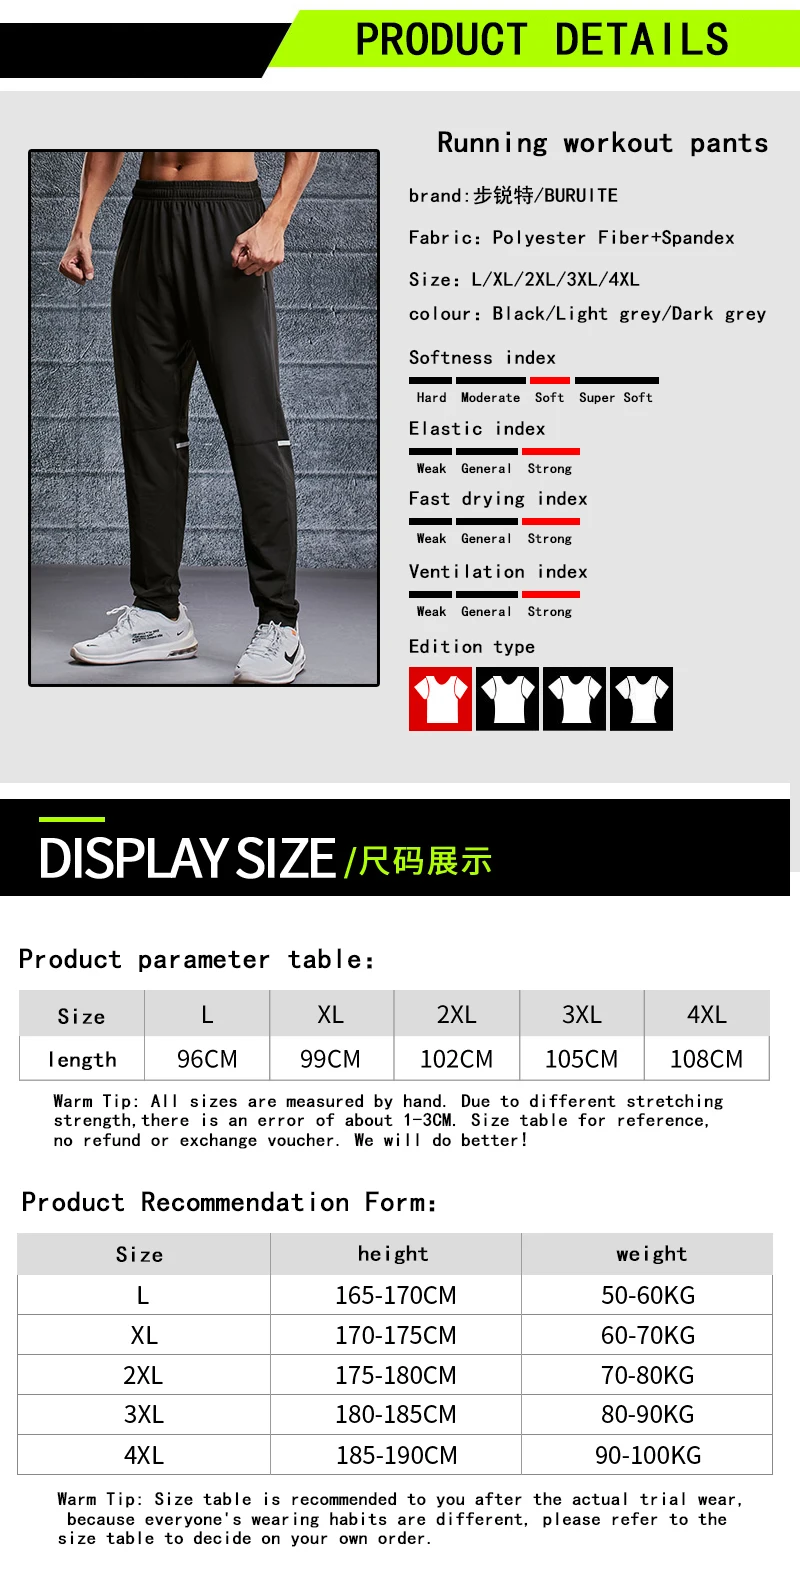 Sports pants men pants autumn winter loose quick drying pants Pocket zipper casual health pants thin running fitness trousers